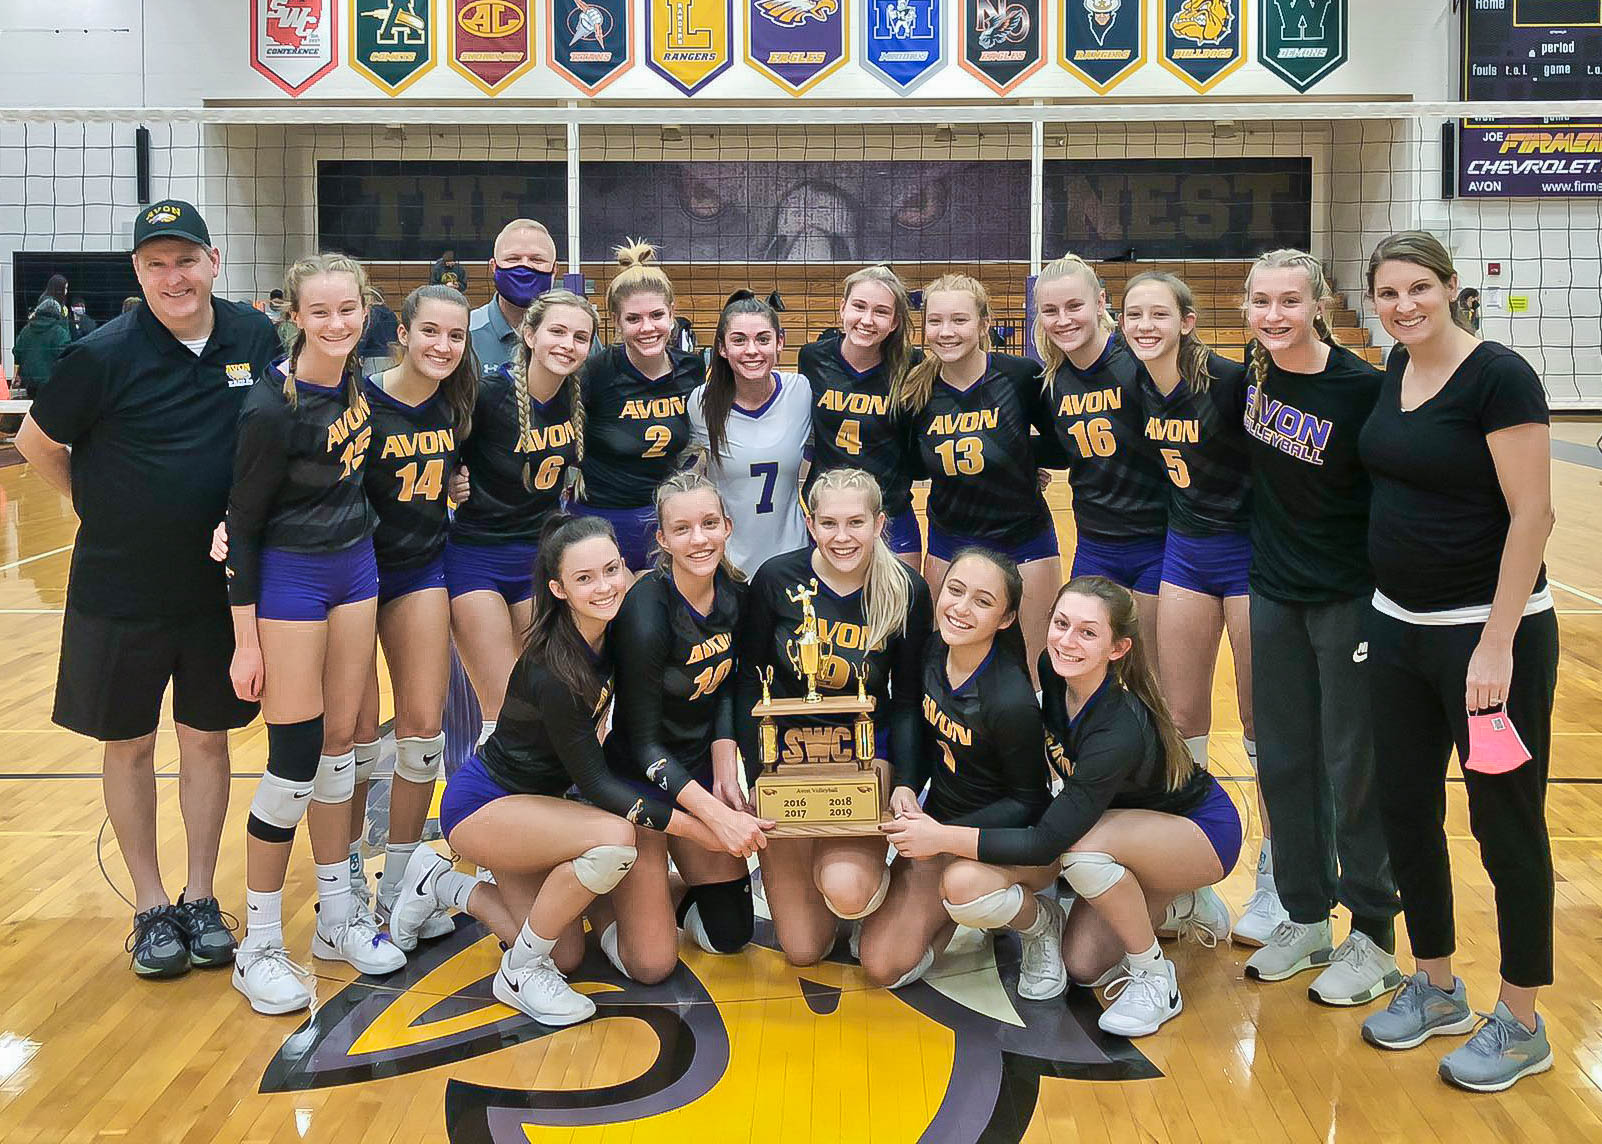 avon-wins-swc-volleyball-title-the-villager-newspaper-online